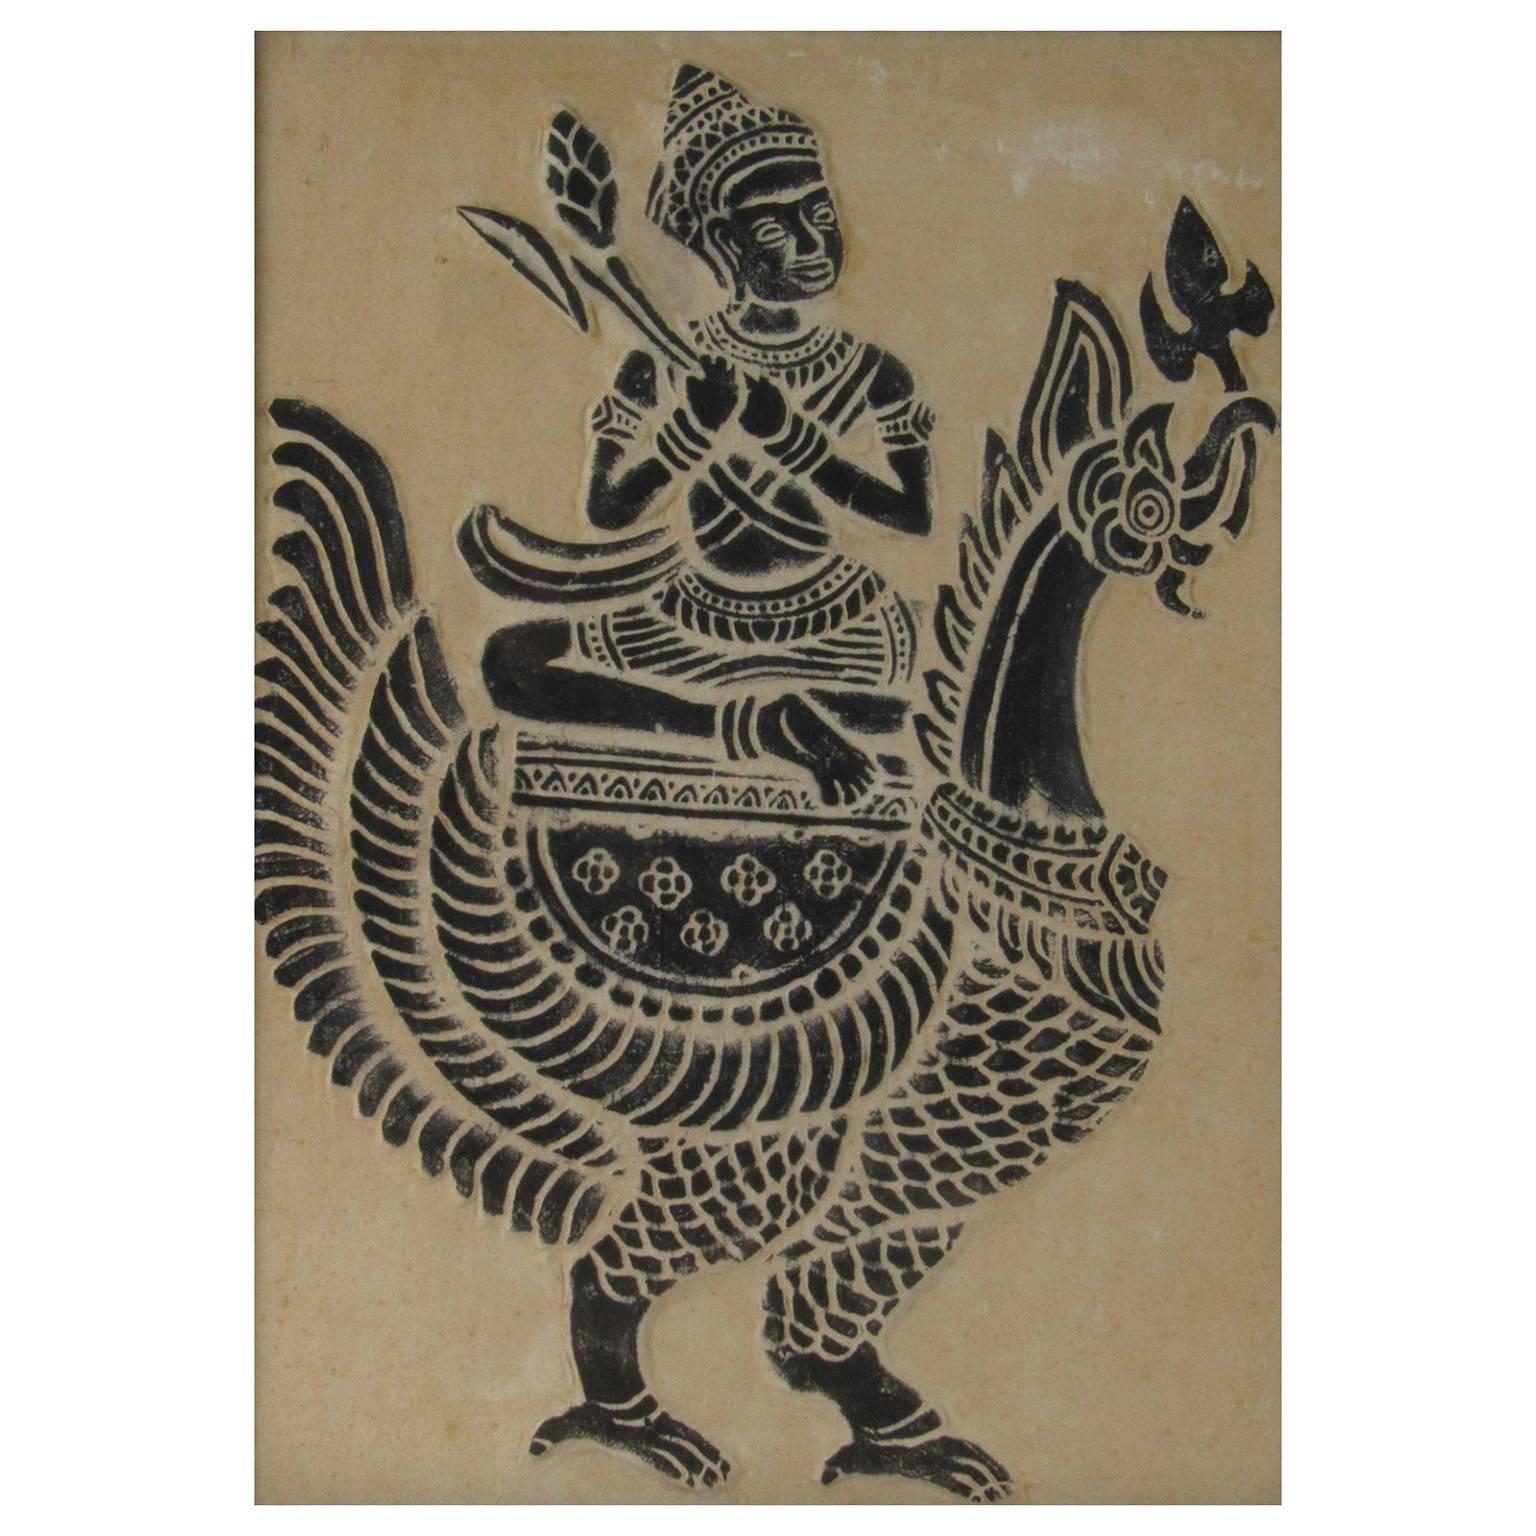 Thai temple rubbing on handmade paper with diety riding a rooster. Bears 